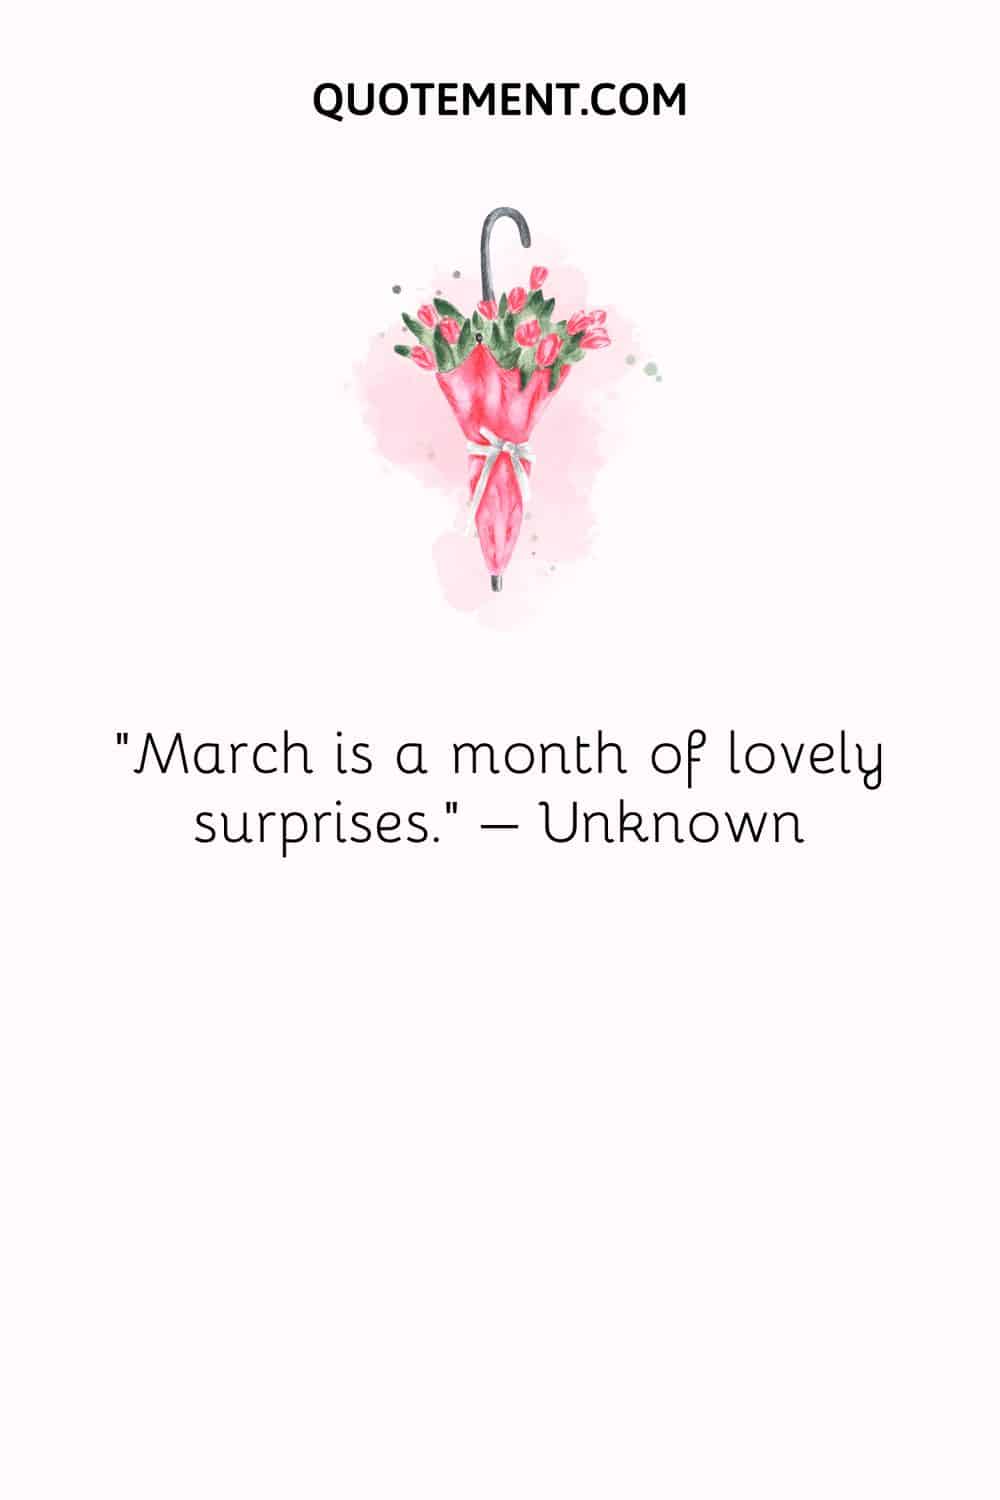 March is a month of lovely surprises. – Unknown